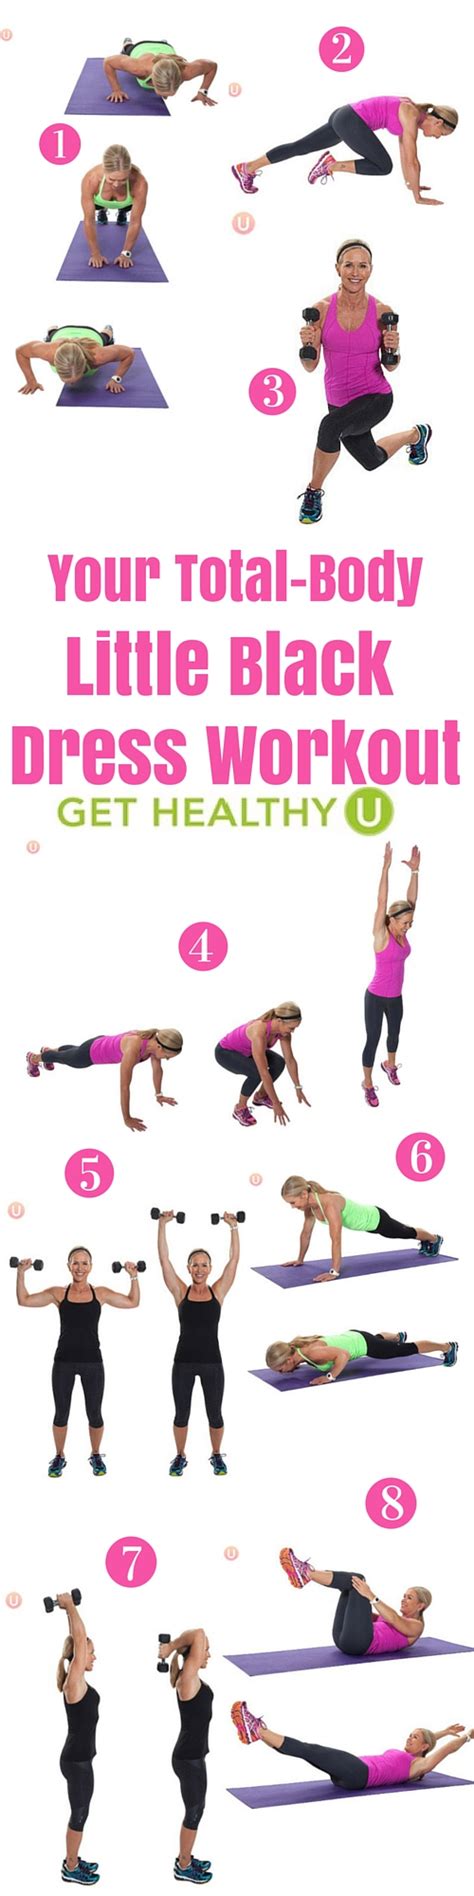 Your Total Body Little Black Dress Workout At Home Workouts For Women